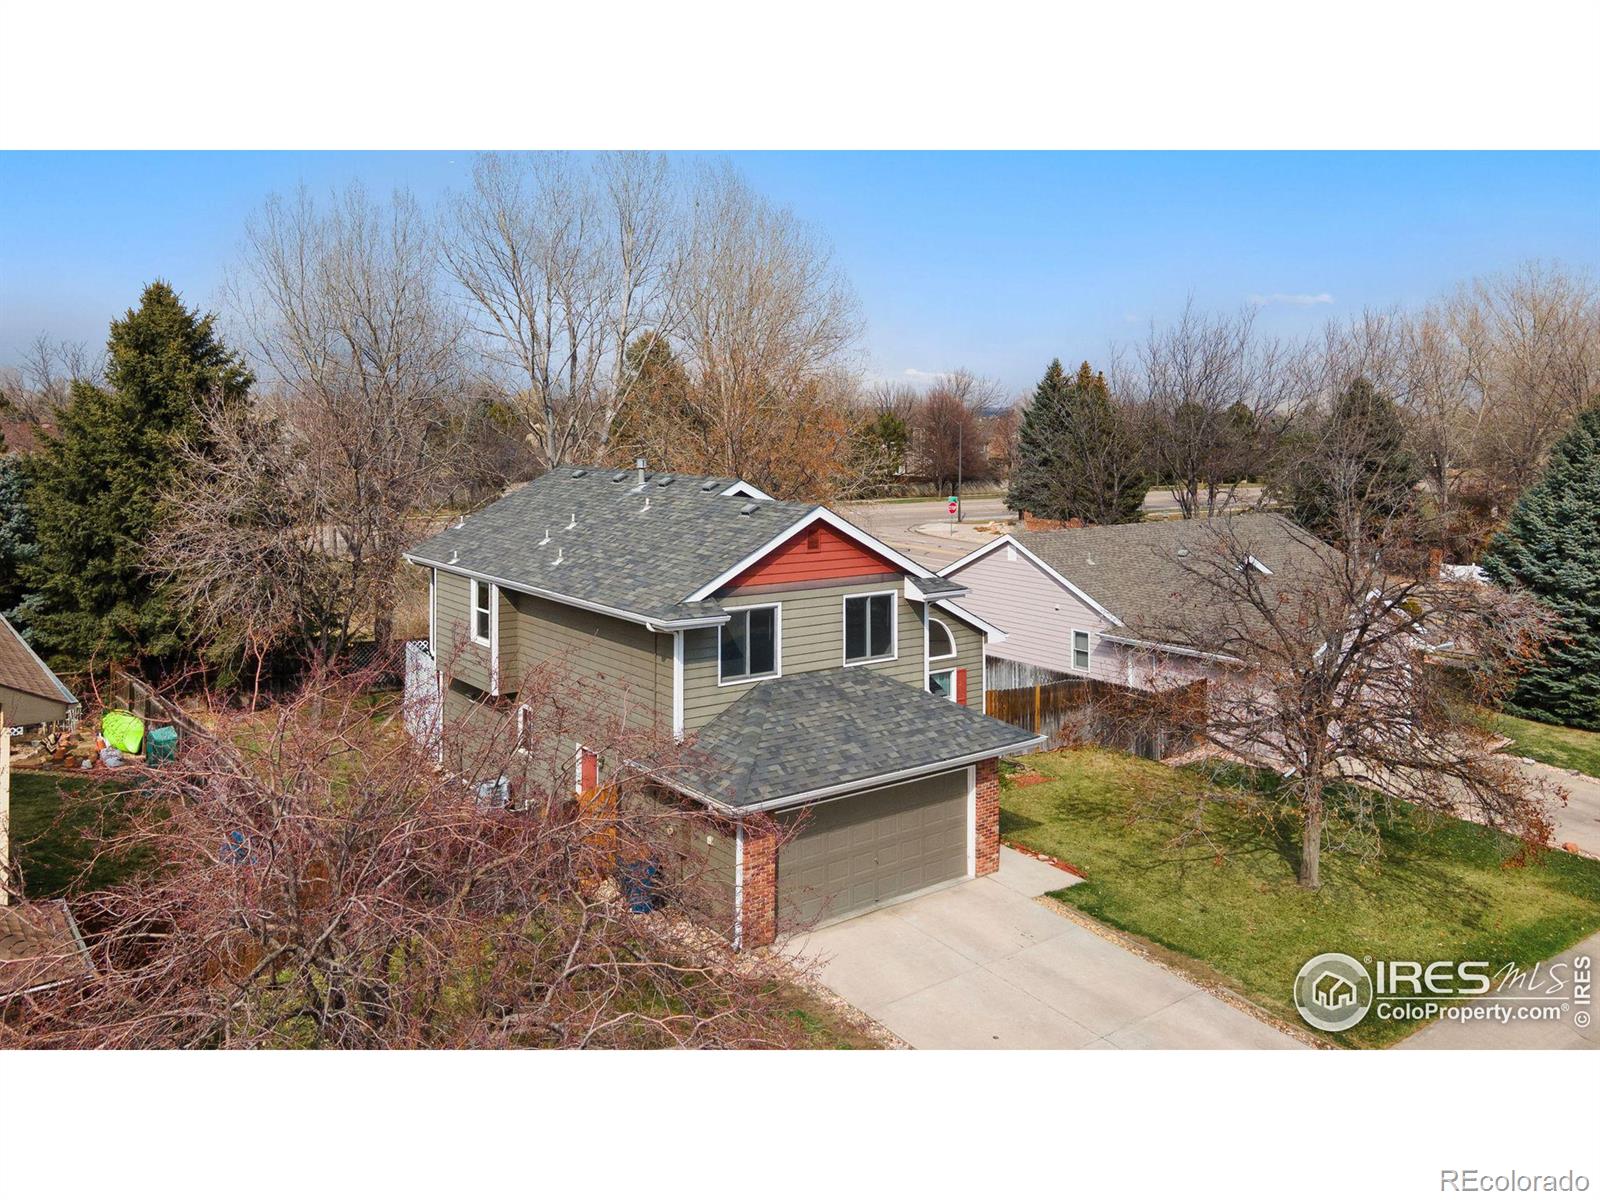 Report Image for 2718  Antelope Road,Fort Collins, Colorado